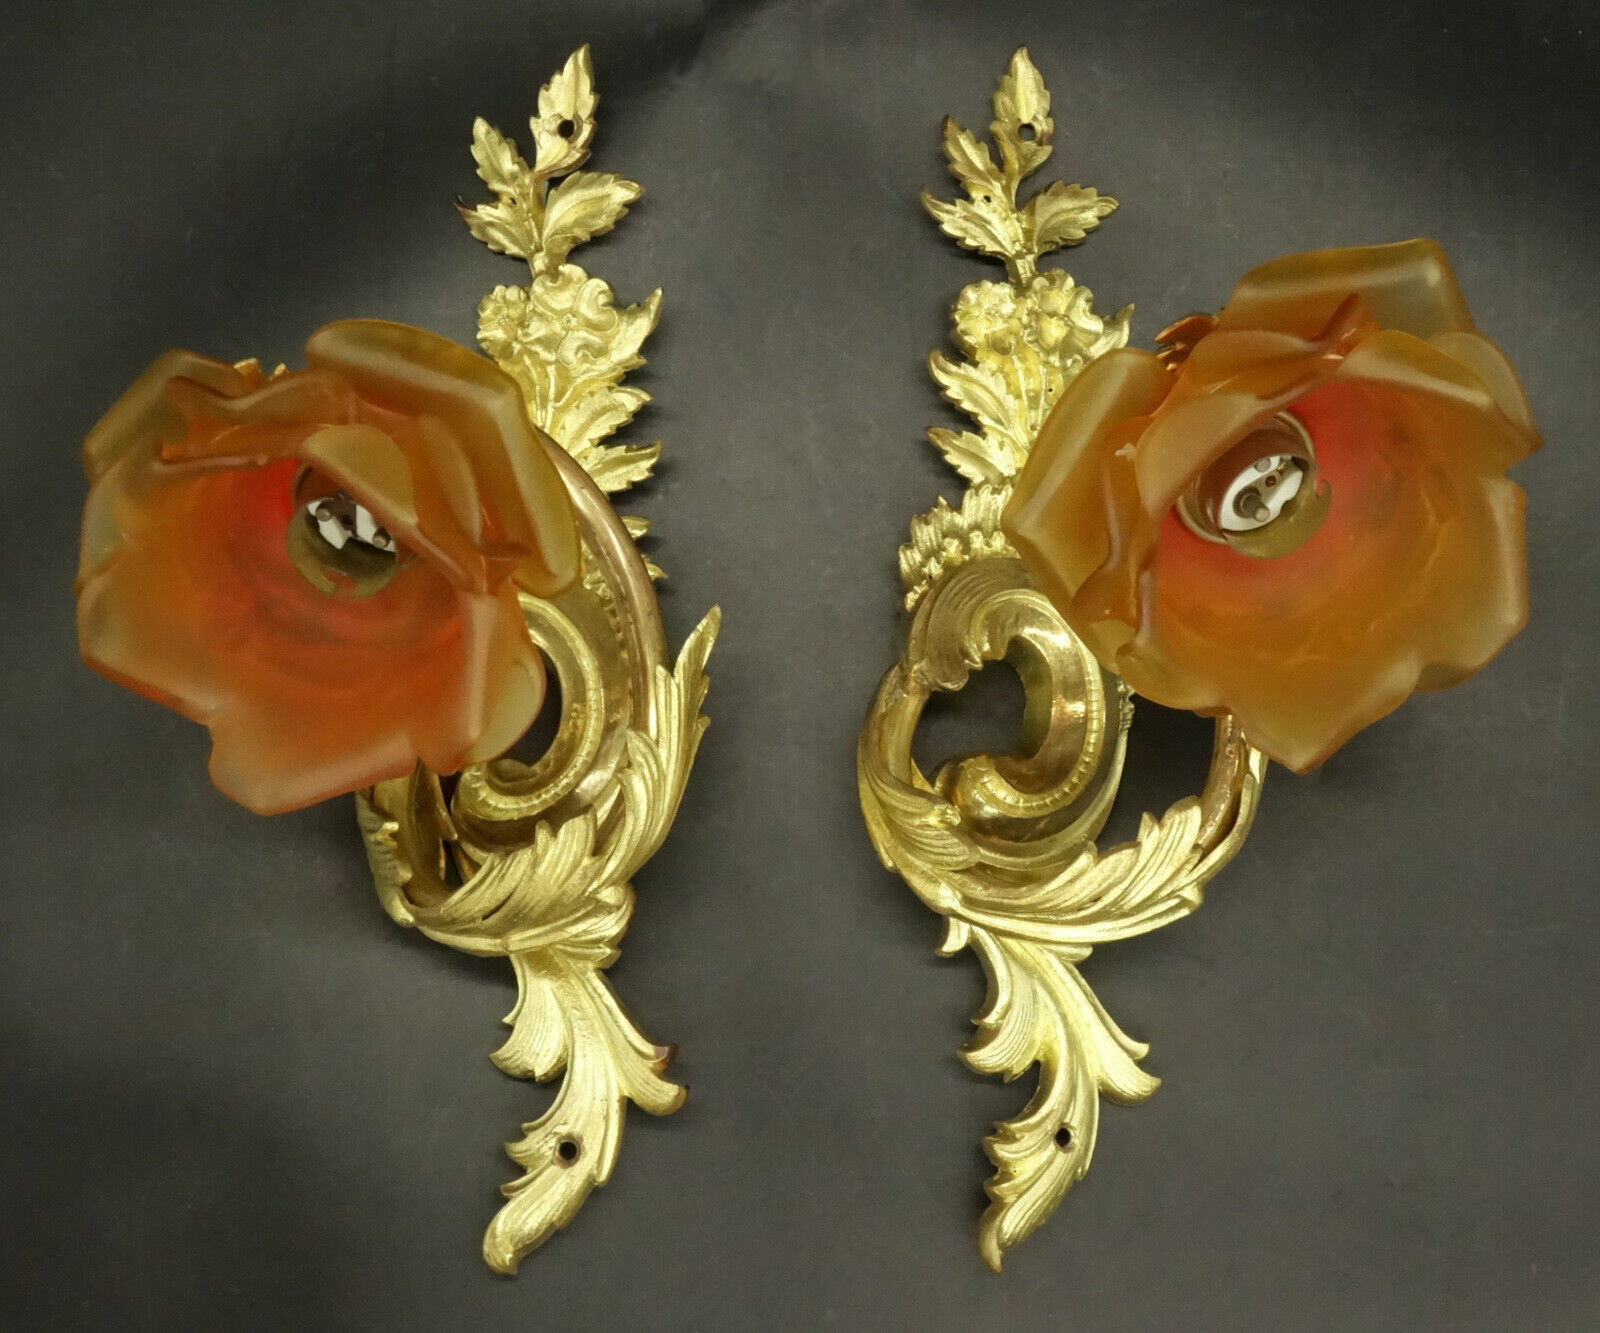 PAIR OF SCONCES LOUIS XV STYLE EARLY 1900 - BRONZE & GLASS - FRENCH ANTIQUE